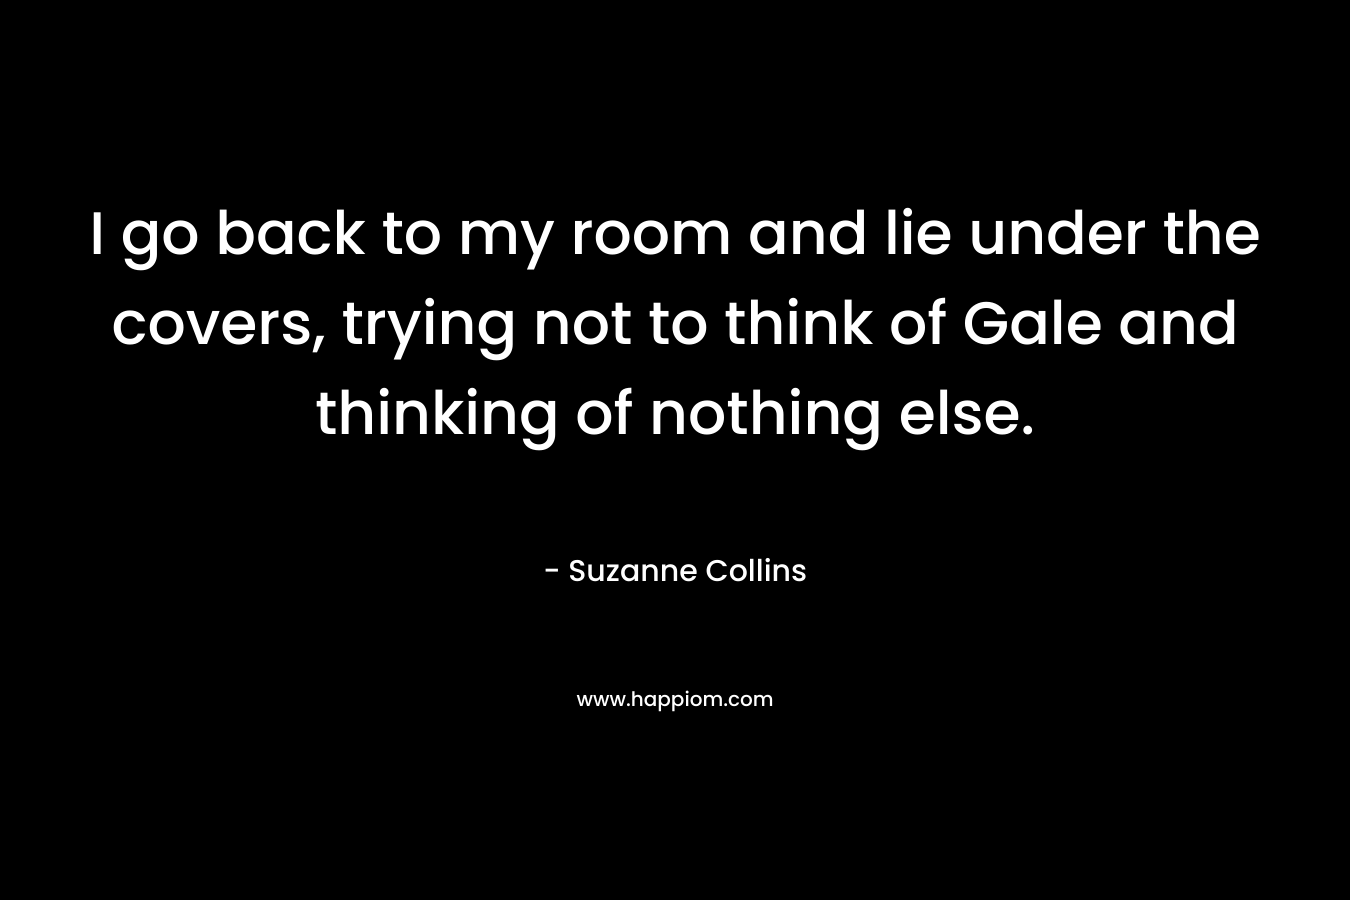 I go back to my room and lie under the covers, trying not to think of Gale and thinking of nothing else.